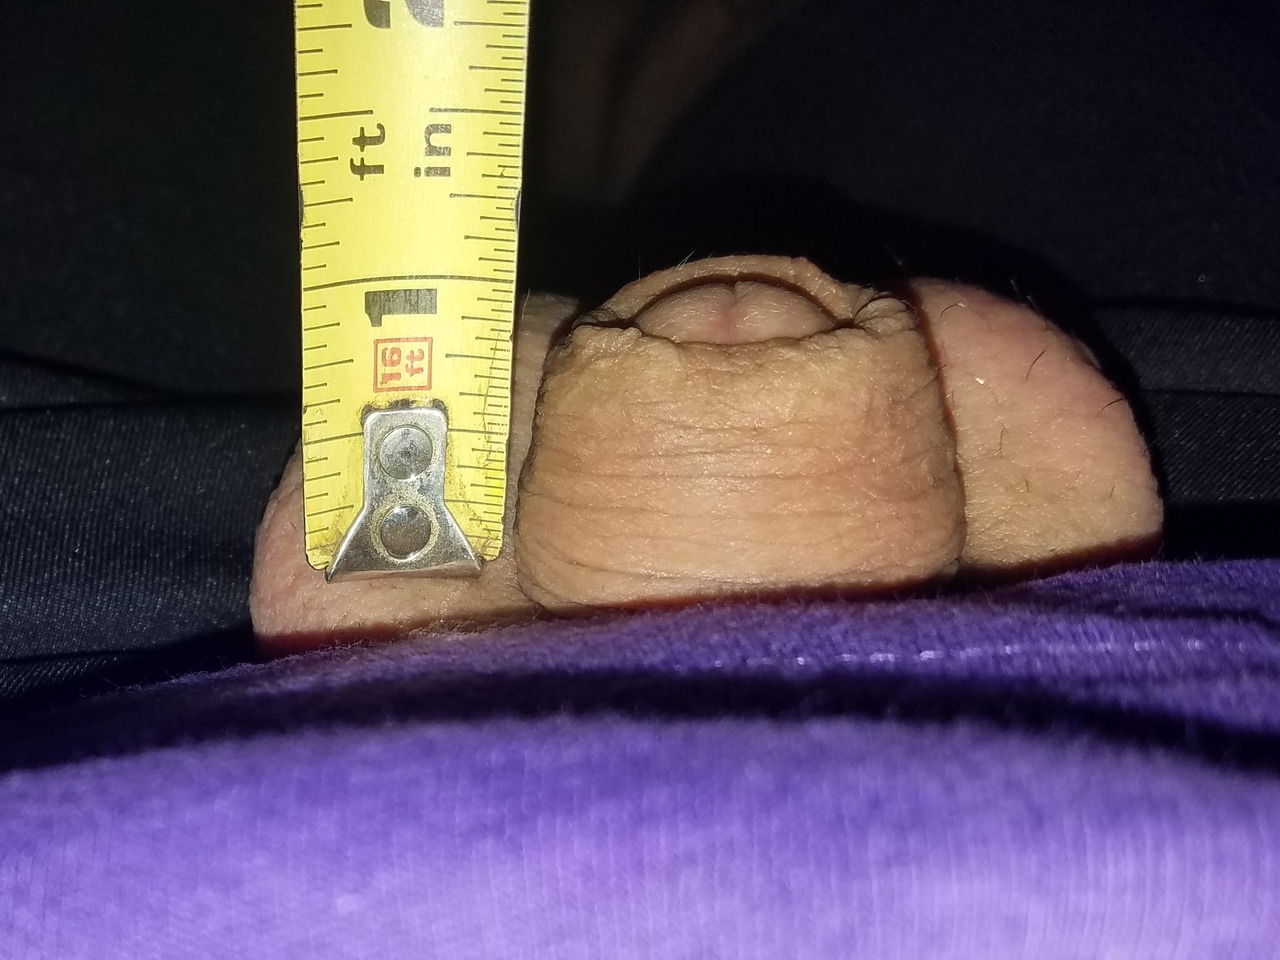 Photo by tinywhiteboi with the username @tinywhiteboi, who is a verified user,  January 5, 2019 at 10:22 PM and the text says 'My little peepee used to be almost 4" long. After long-term chastity it has shrunk to almost 1", a little nub that no longer gets hard. And I love it'